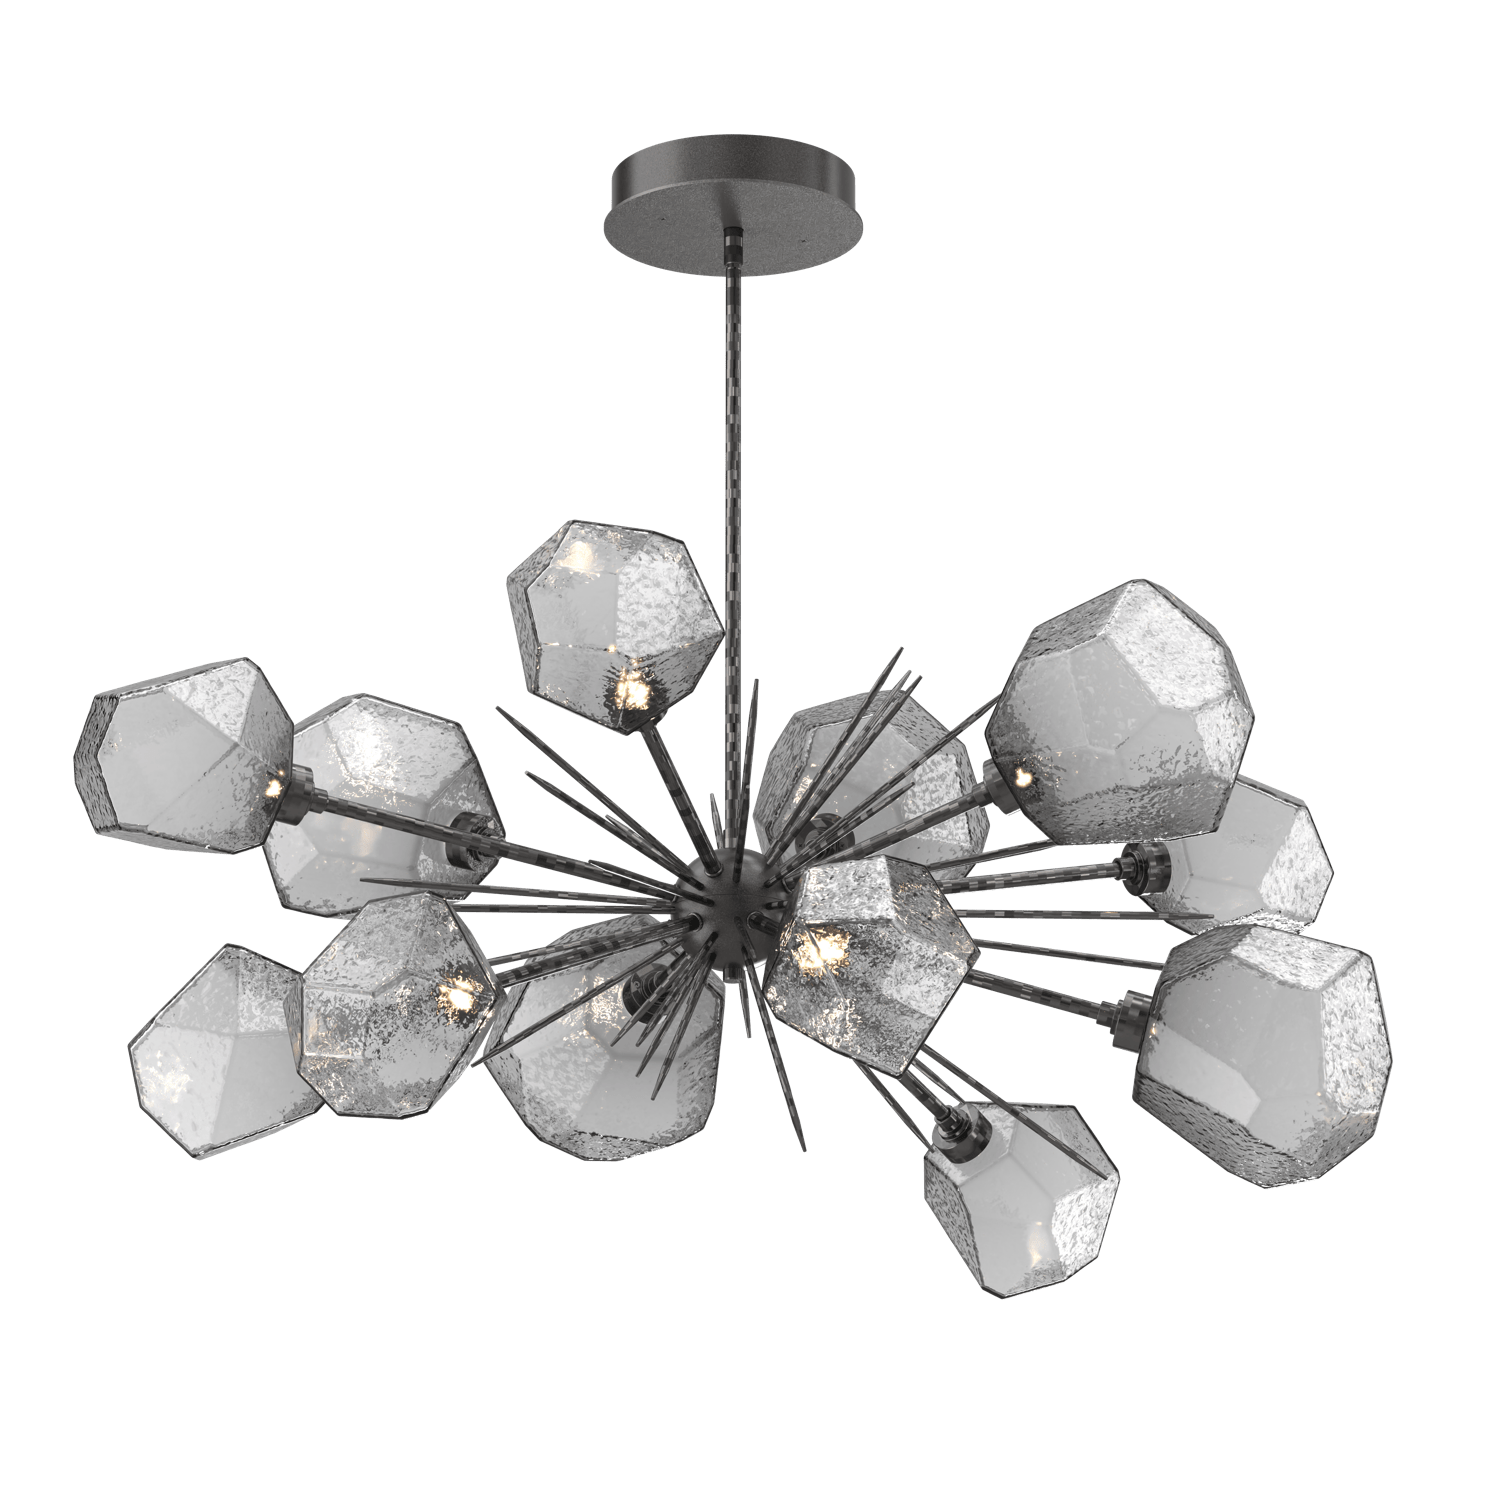 PLB0039-0D-GP-S-Hammerton-Studio-Gem-43-inch-oval-starburst-chandelier-with-graphite-finish-and-smoke-blown-glass-shades-and-LED-lamping